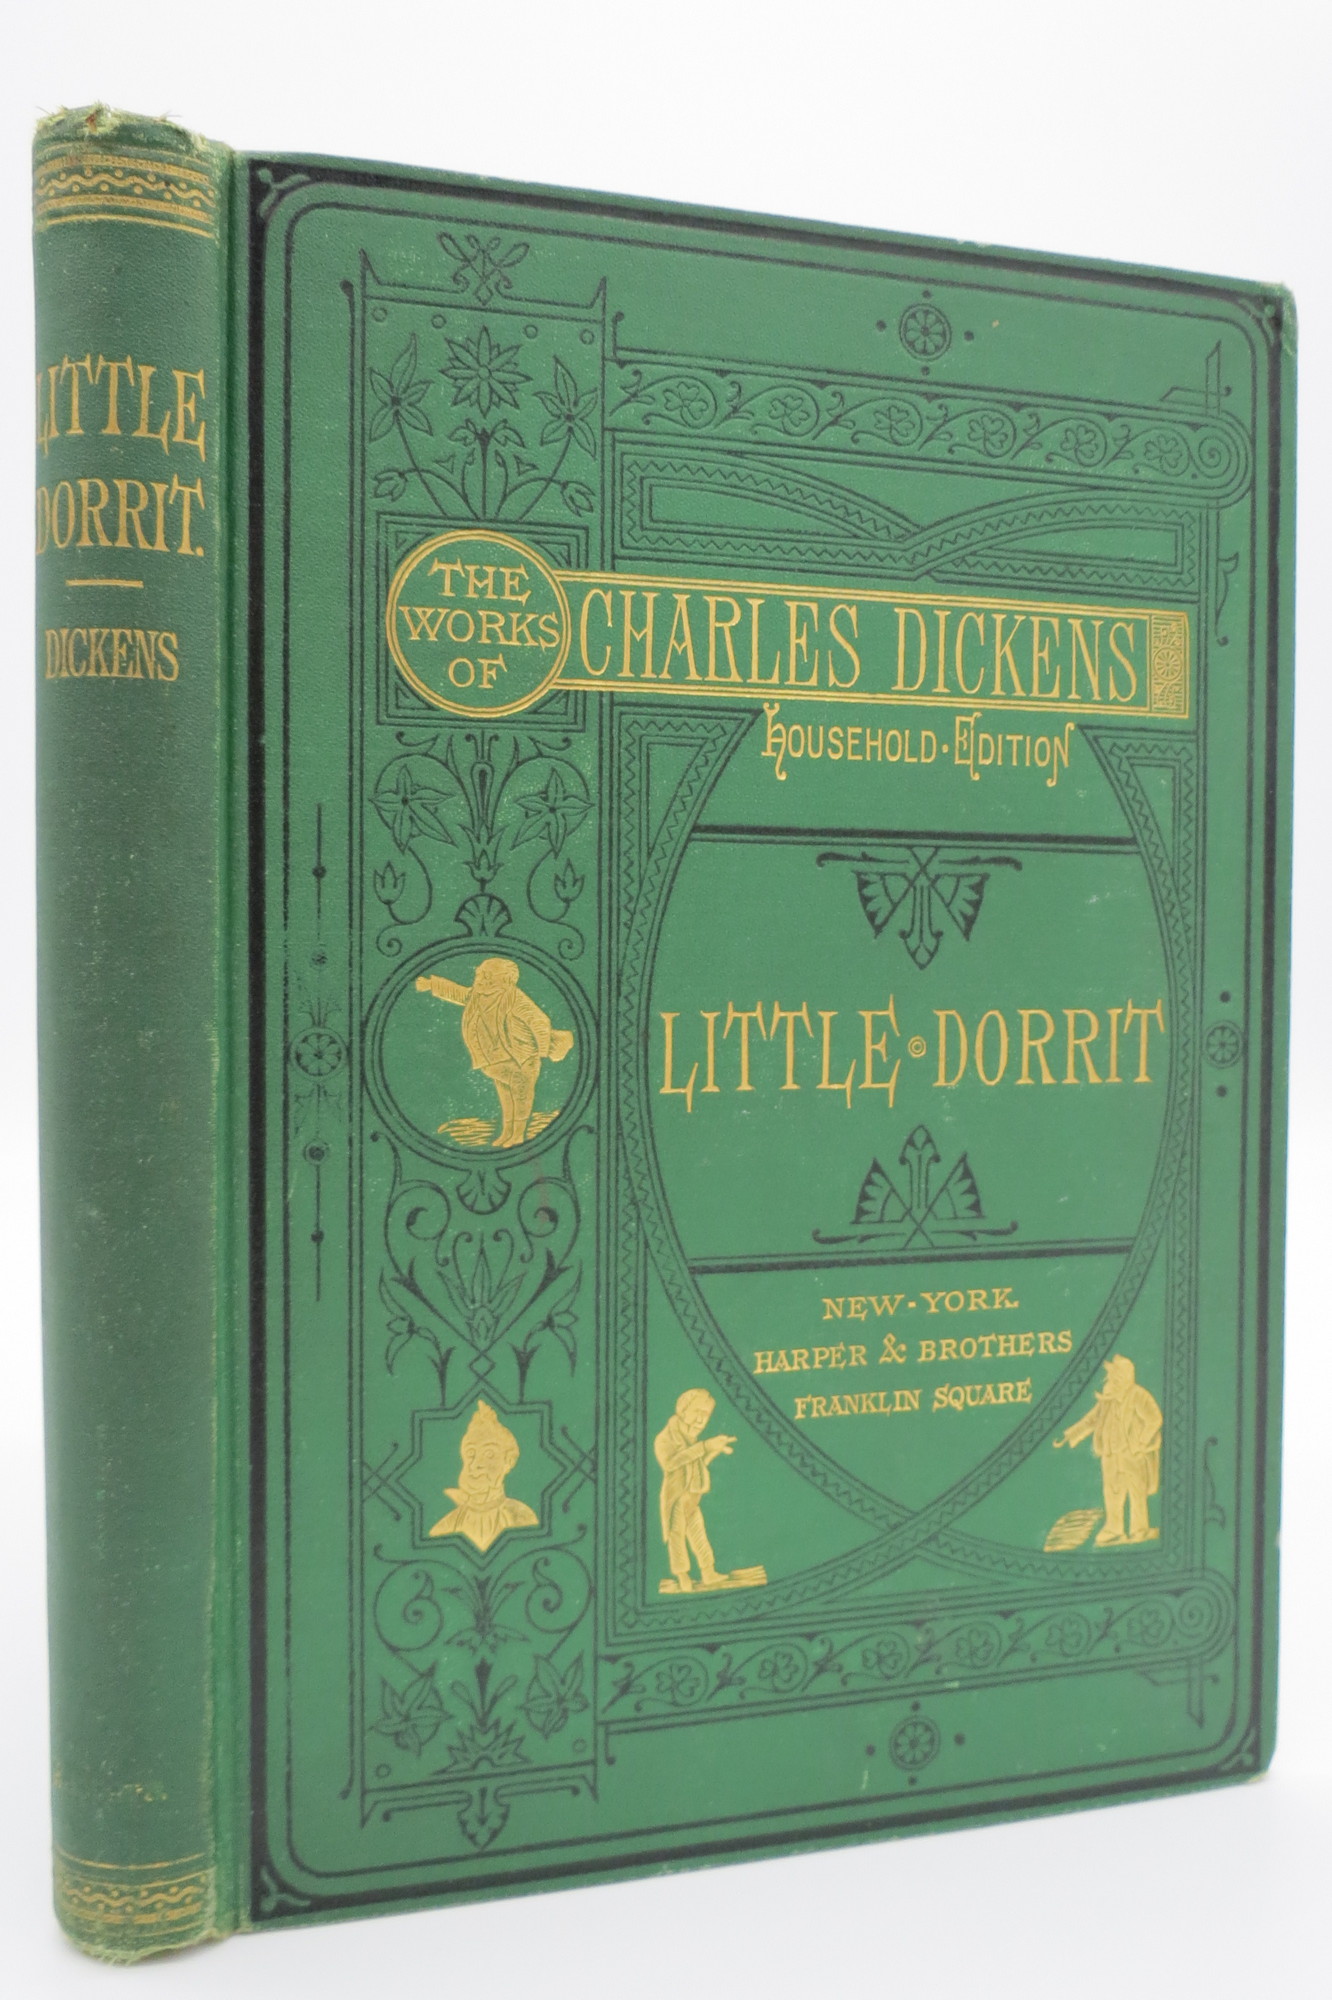 Image for LITTLE DORRIT (FROM THE WORKS OF CHARLES DICKENS HOUSEHOLD EDITION) (Fine Victorian Binding)